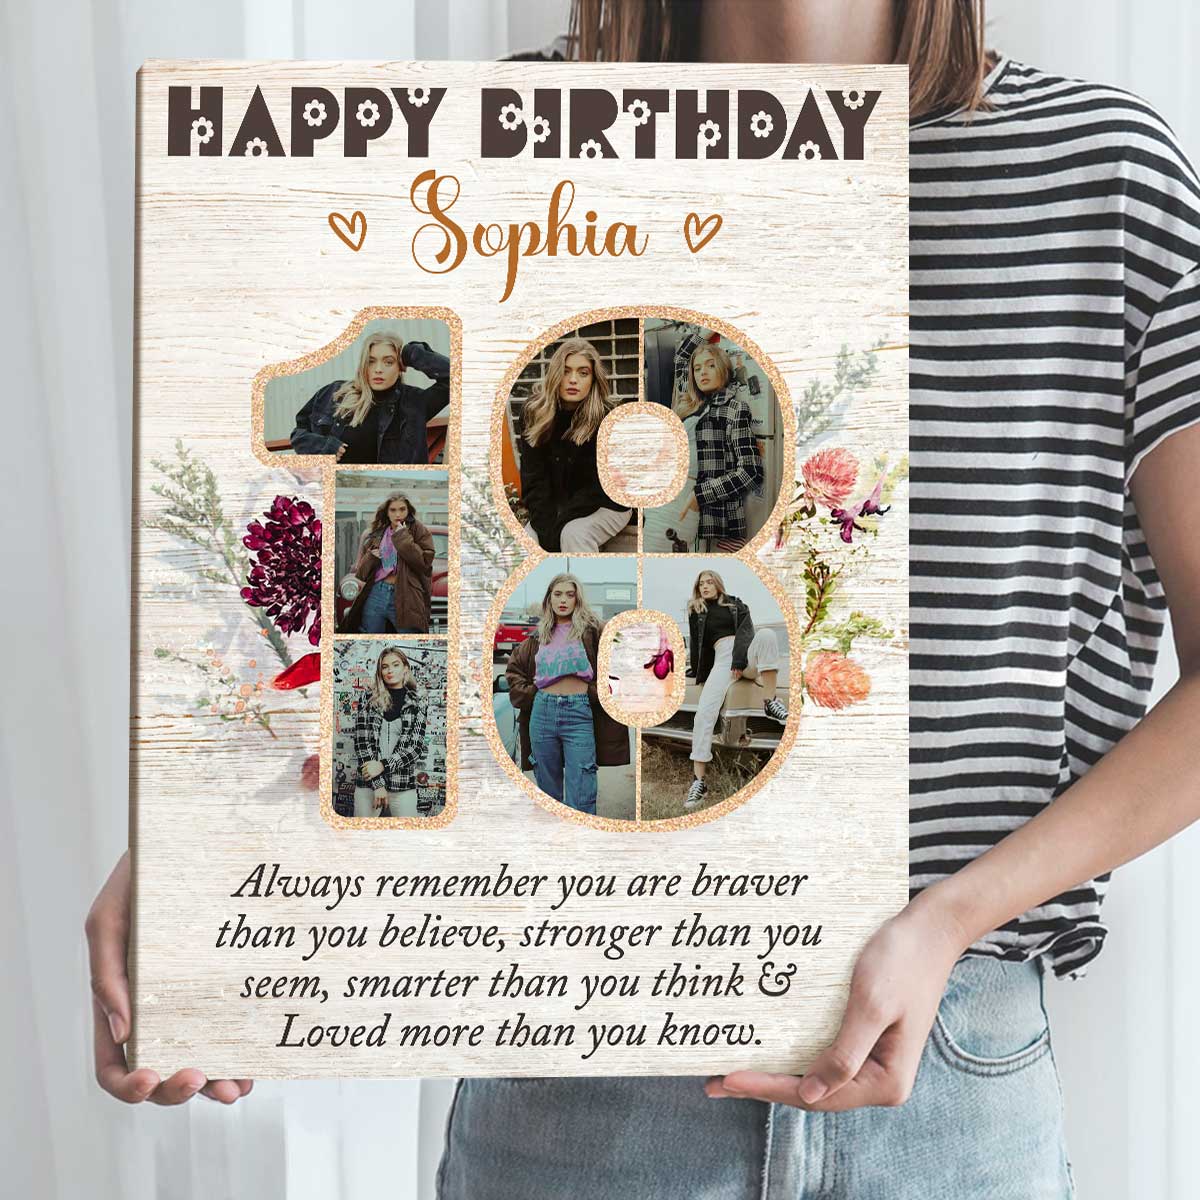 https://benicee.com/wp-content/uploads/2022/10/Personalised-18th-Birthday-Gifts-Best-18th-Birthday-Gifts-For-Her-For-Daughter-For-Best-Friend-18th-Birthday-Photo-Collage-2.jpg